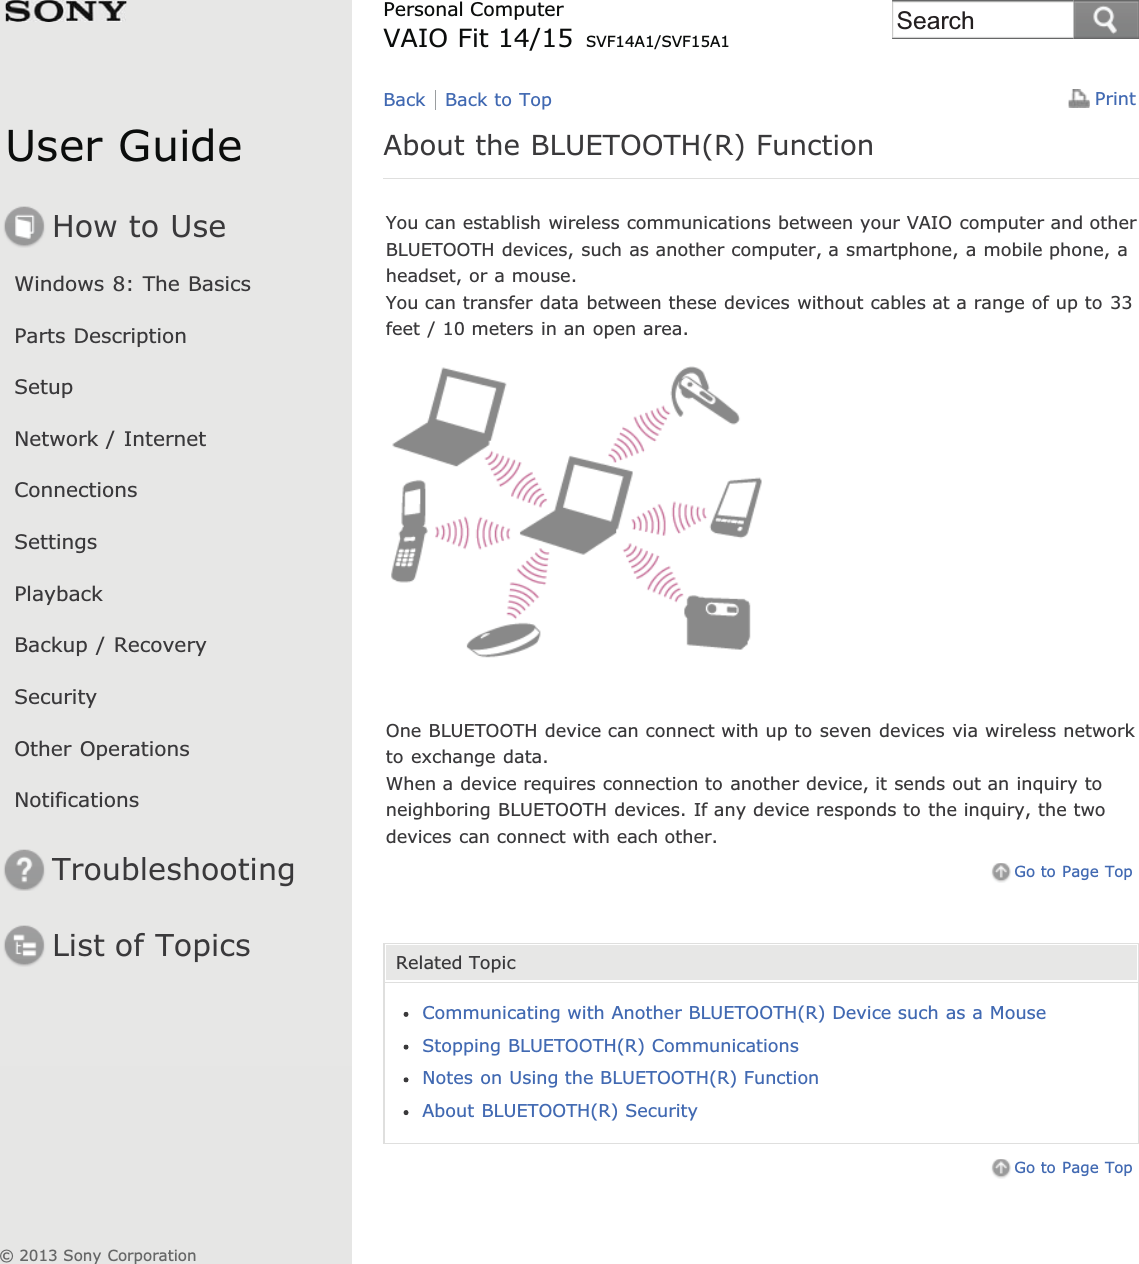 User GuideHow to UseWindows 8: The BasicsParts DescriptionSetupNetwork / InternetConnectionsSettingsPlaybackBackup / RecoverySecurityOther OperationsNotificationsTroubleshootingList of TopicsPrintPersonal ComputerVAIO Fit 14/15 SVF14A1/SVF15A1About the BLUETOOTH(R) FunctionYou can establish wireless communications between your VAIO computer and otherBLUETOOTH devices, such as another computer, a smartphone, a mobile phone, aheadset, or a mouse.You can transfer data between these devices without cables at a range of up to 33feet / 10 meters in an open area.One BLUETOOTH device can connect with up to seven devices via wireless networkto exchange data.When a device requires connection to another device, it sends out an inquiry toneighboring BLUETOOTH devices. If any device responds to the inquiry, the twodevices can connect with each other.Go to Page TopRelated TopicCommunicating with Another BLUETOOTH(R) Device such as a MouseStopping BLUETOOTH(R) CommunicationsNotes on Using the BLUETOOTH(R) FunctionAbout BLUETOOTH(R) SecurityGo to Page TopBack Back to Top© 2013 Sony CorporationSearch